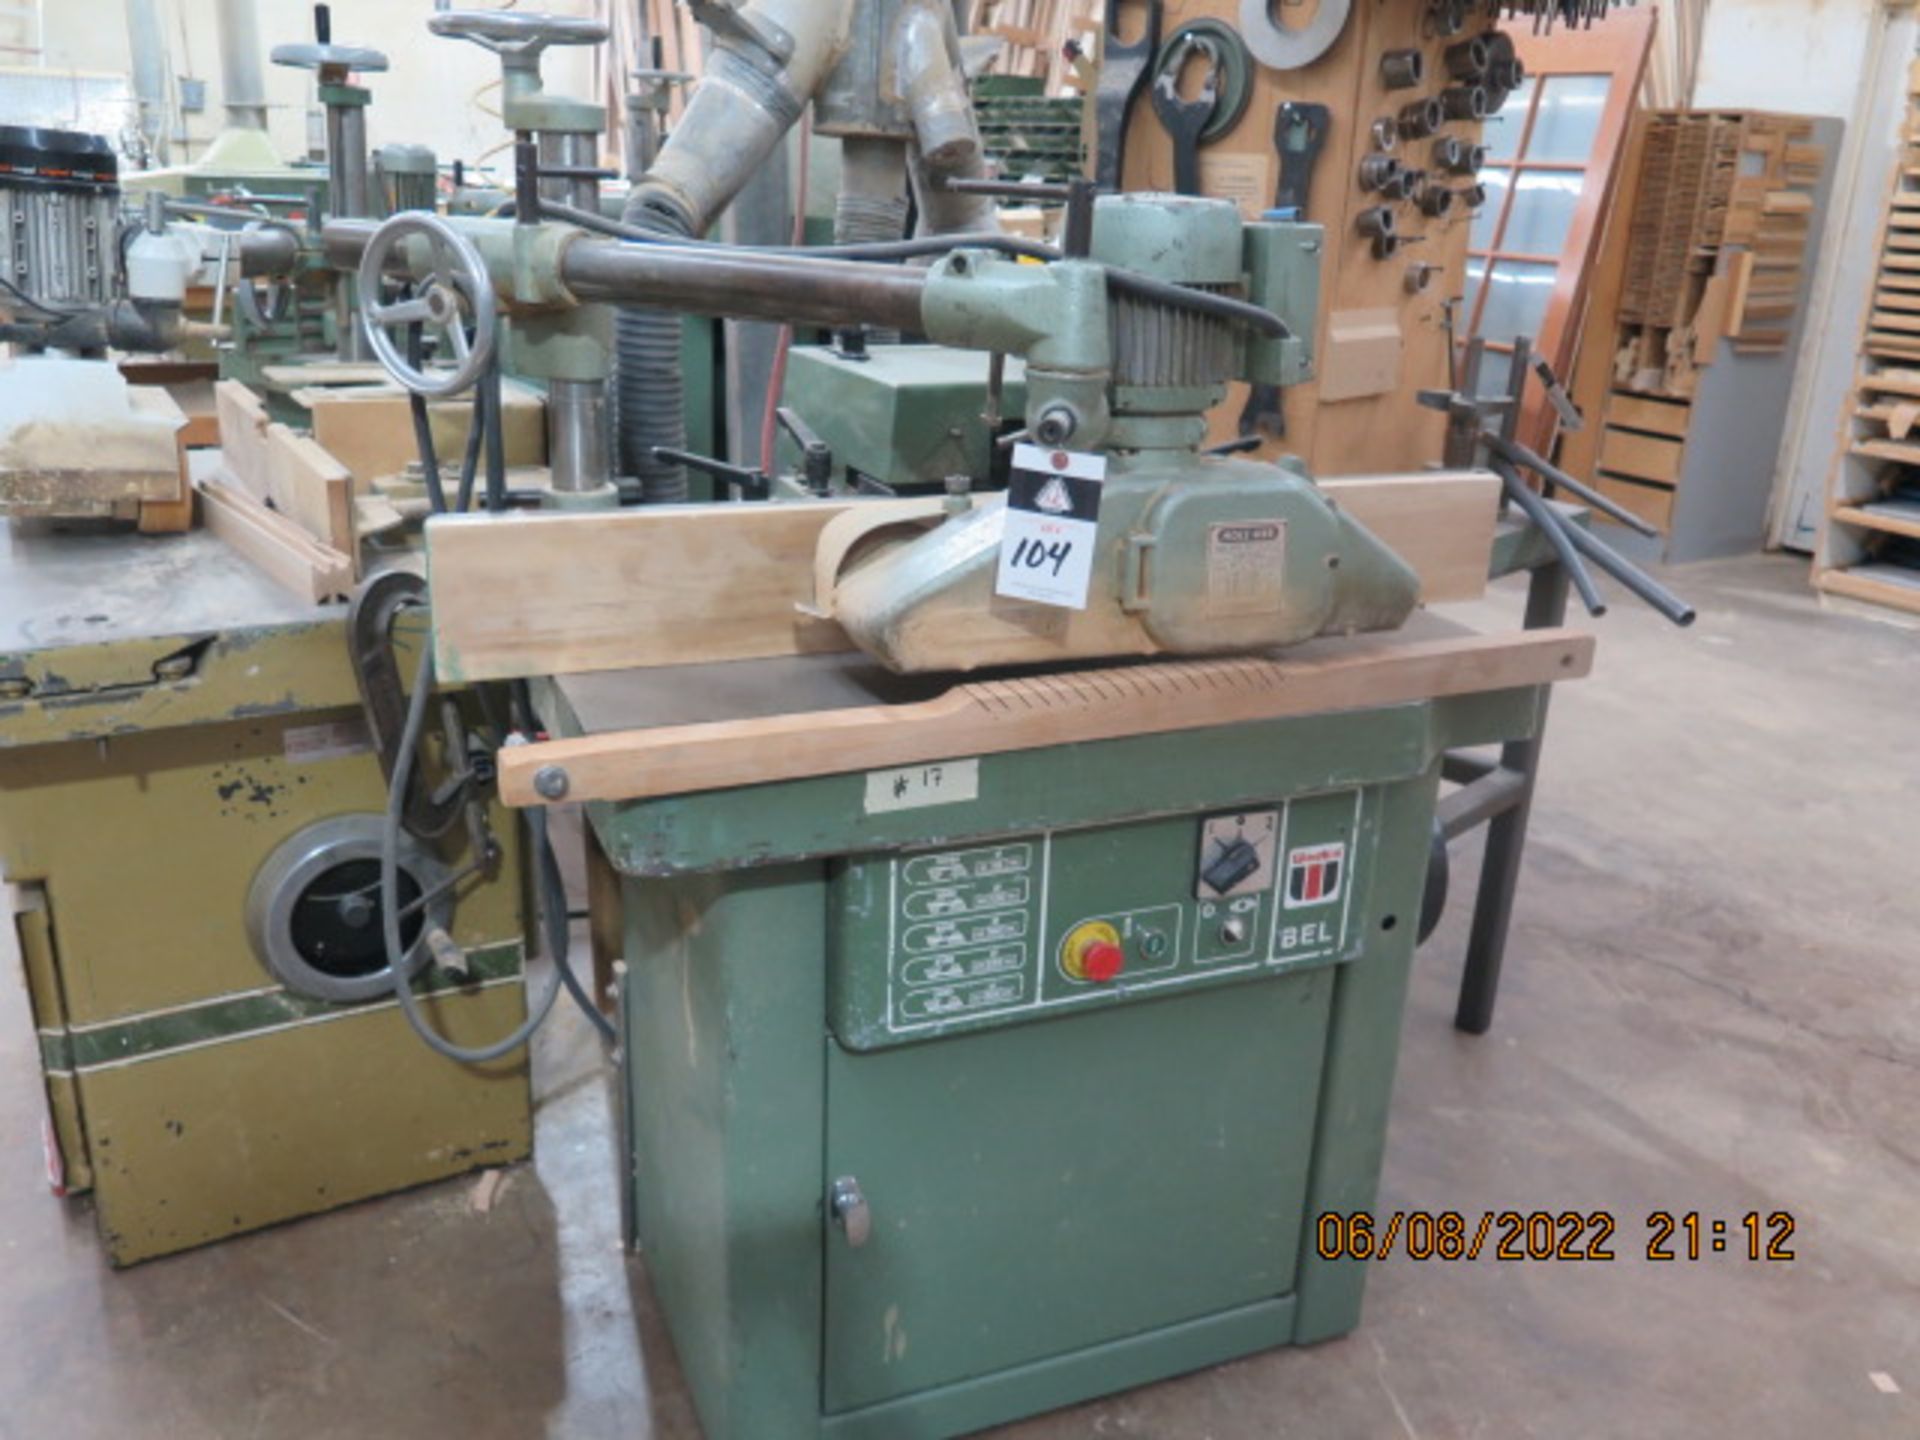 Wadkin BEL Spindle Shaper s/n 930 w/ 3000-10,000 RPM, HolzHer 4-Roll Power Feeder (SOLD AS-IS - NO